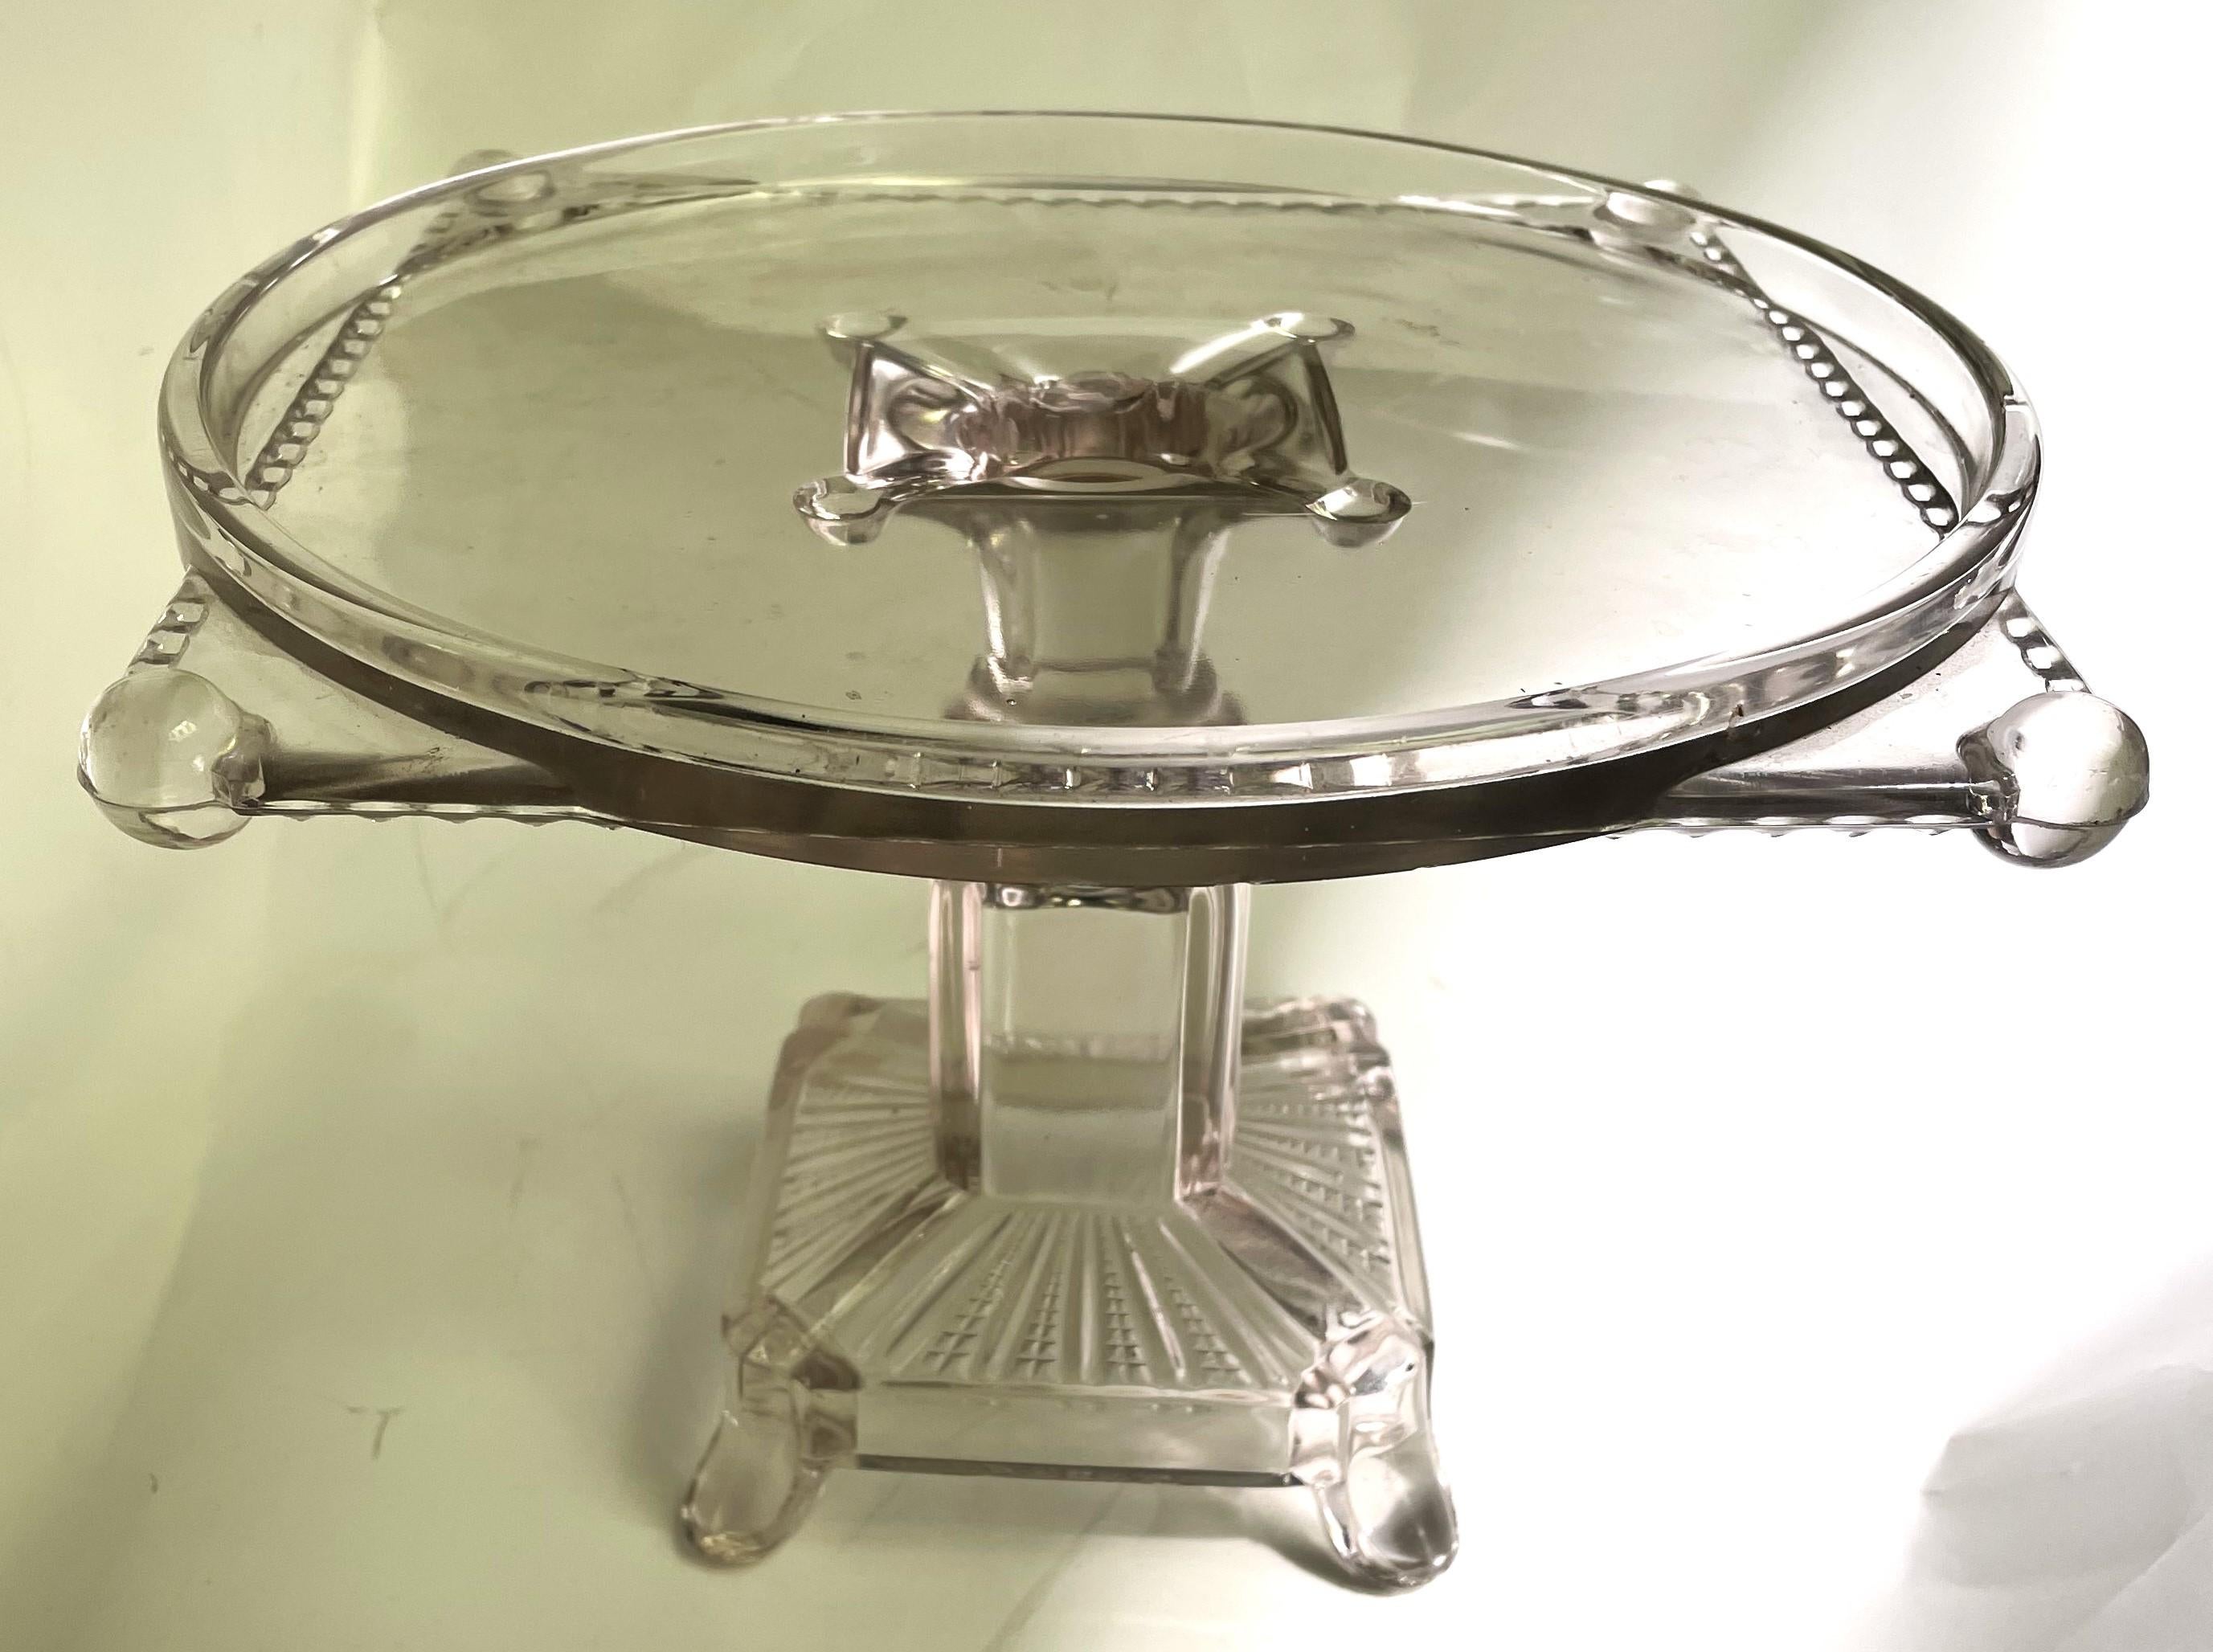 Antique Clear Pressed Glass Pedestal Patisserie Cake Stand Serving Plate Square In Good Condition For Sale In Clifton Forge, VA